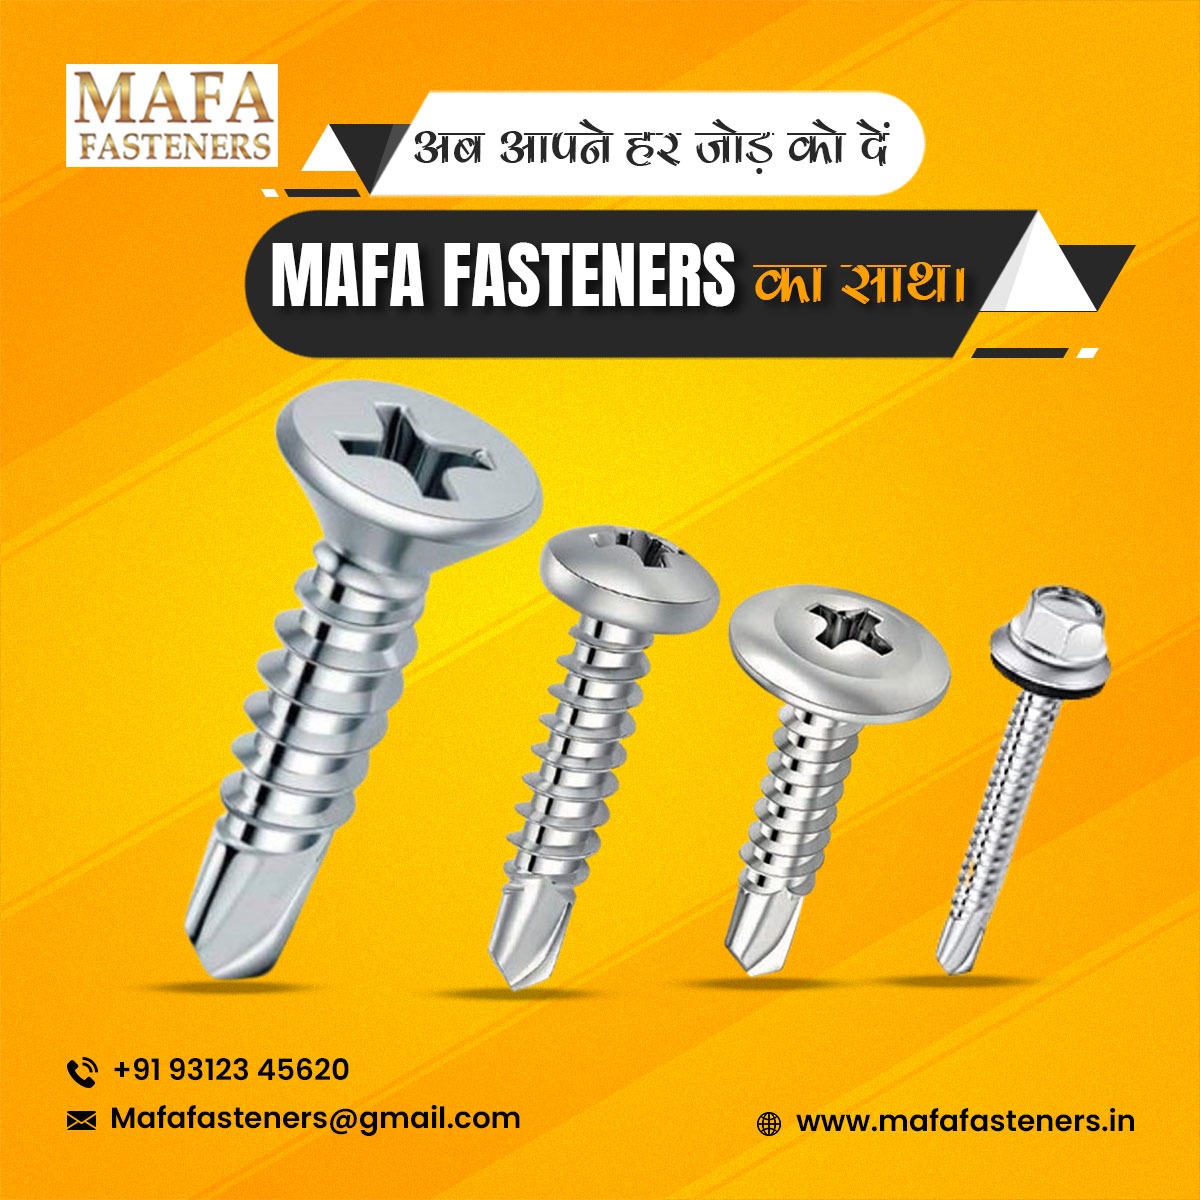 अब आपने हर जोड़ को दें MAFA FASTENERS का साथ…💪
All types of Fasteners are Available
We Provide the Best Quality Fasteners at an Affordable Price😍
📞081123 81023, 9312345620, 99671 97828
📧mafafasteners@gmail.com
💻mafafasteners.in
.
#qualityfasteners #mafafasteners